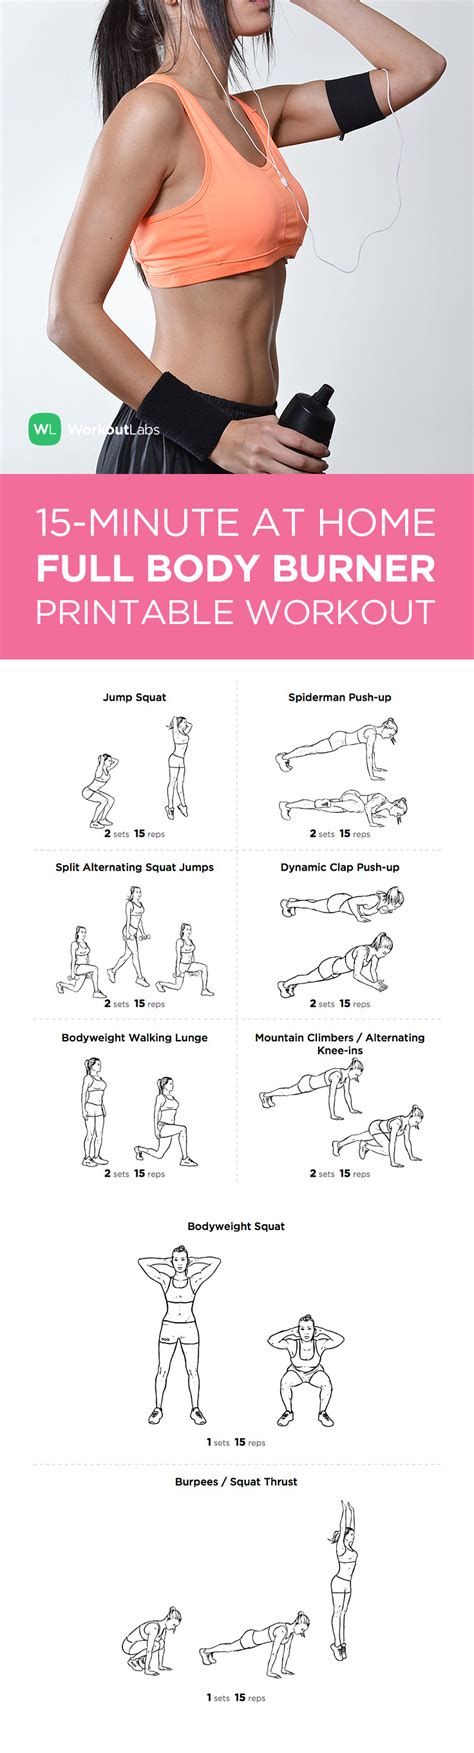 Gym Exercises For Beginners Pdf Bodyweight Exercise